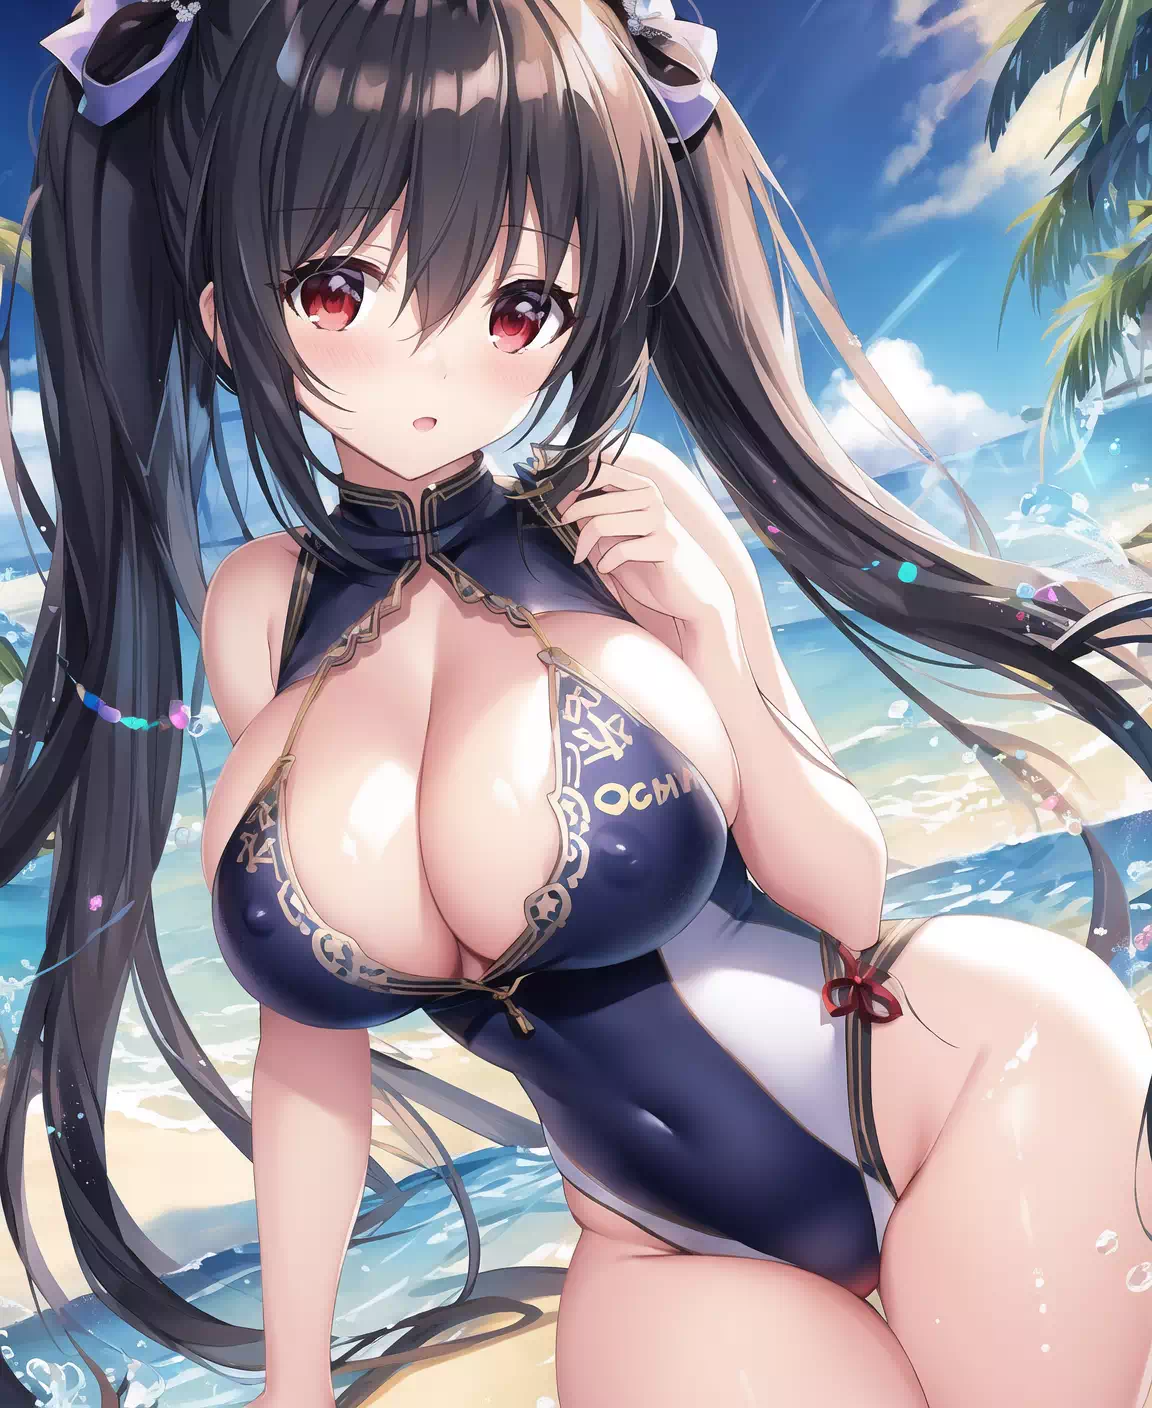 [AnythingV3] Noire in swimsuit